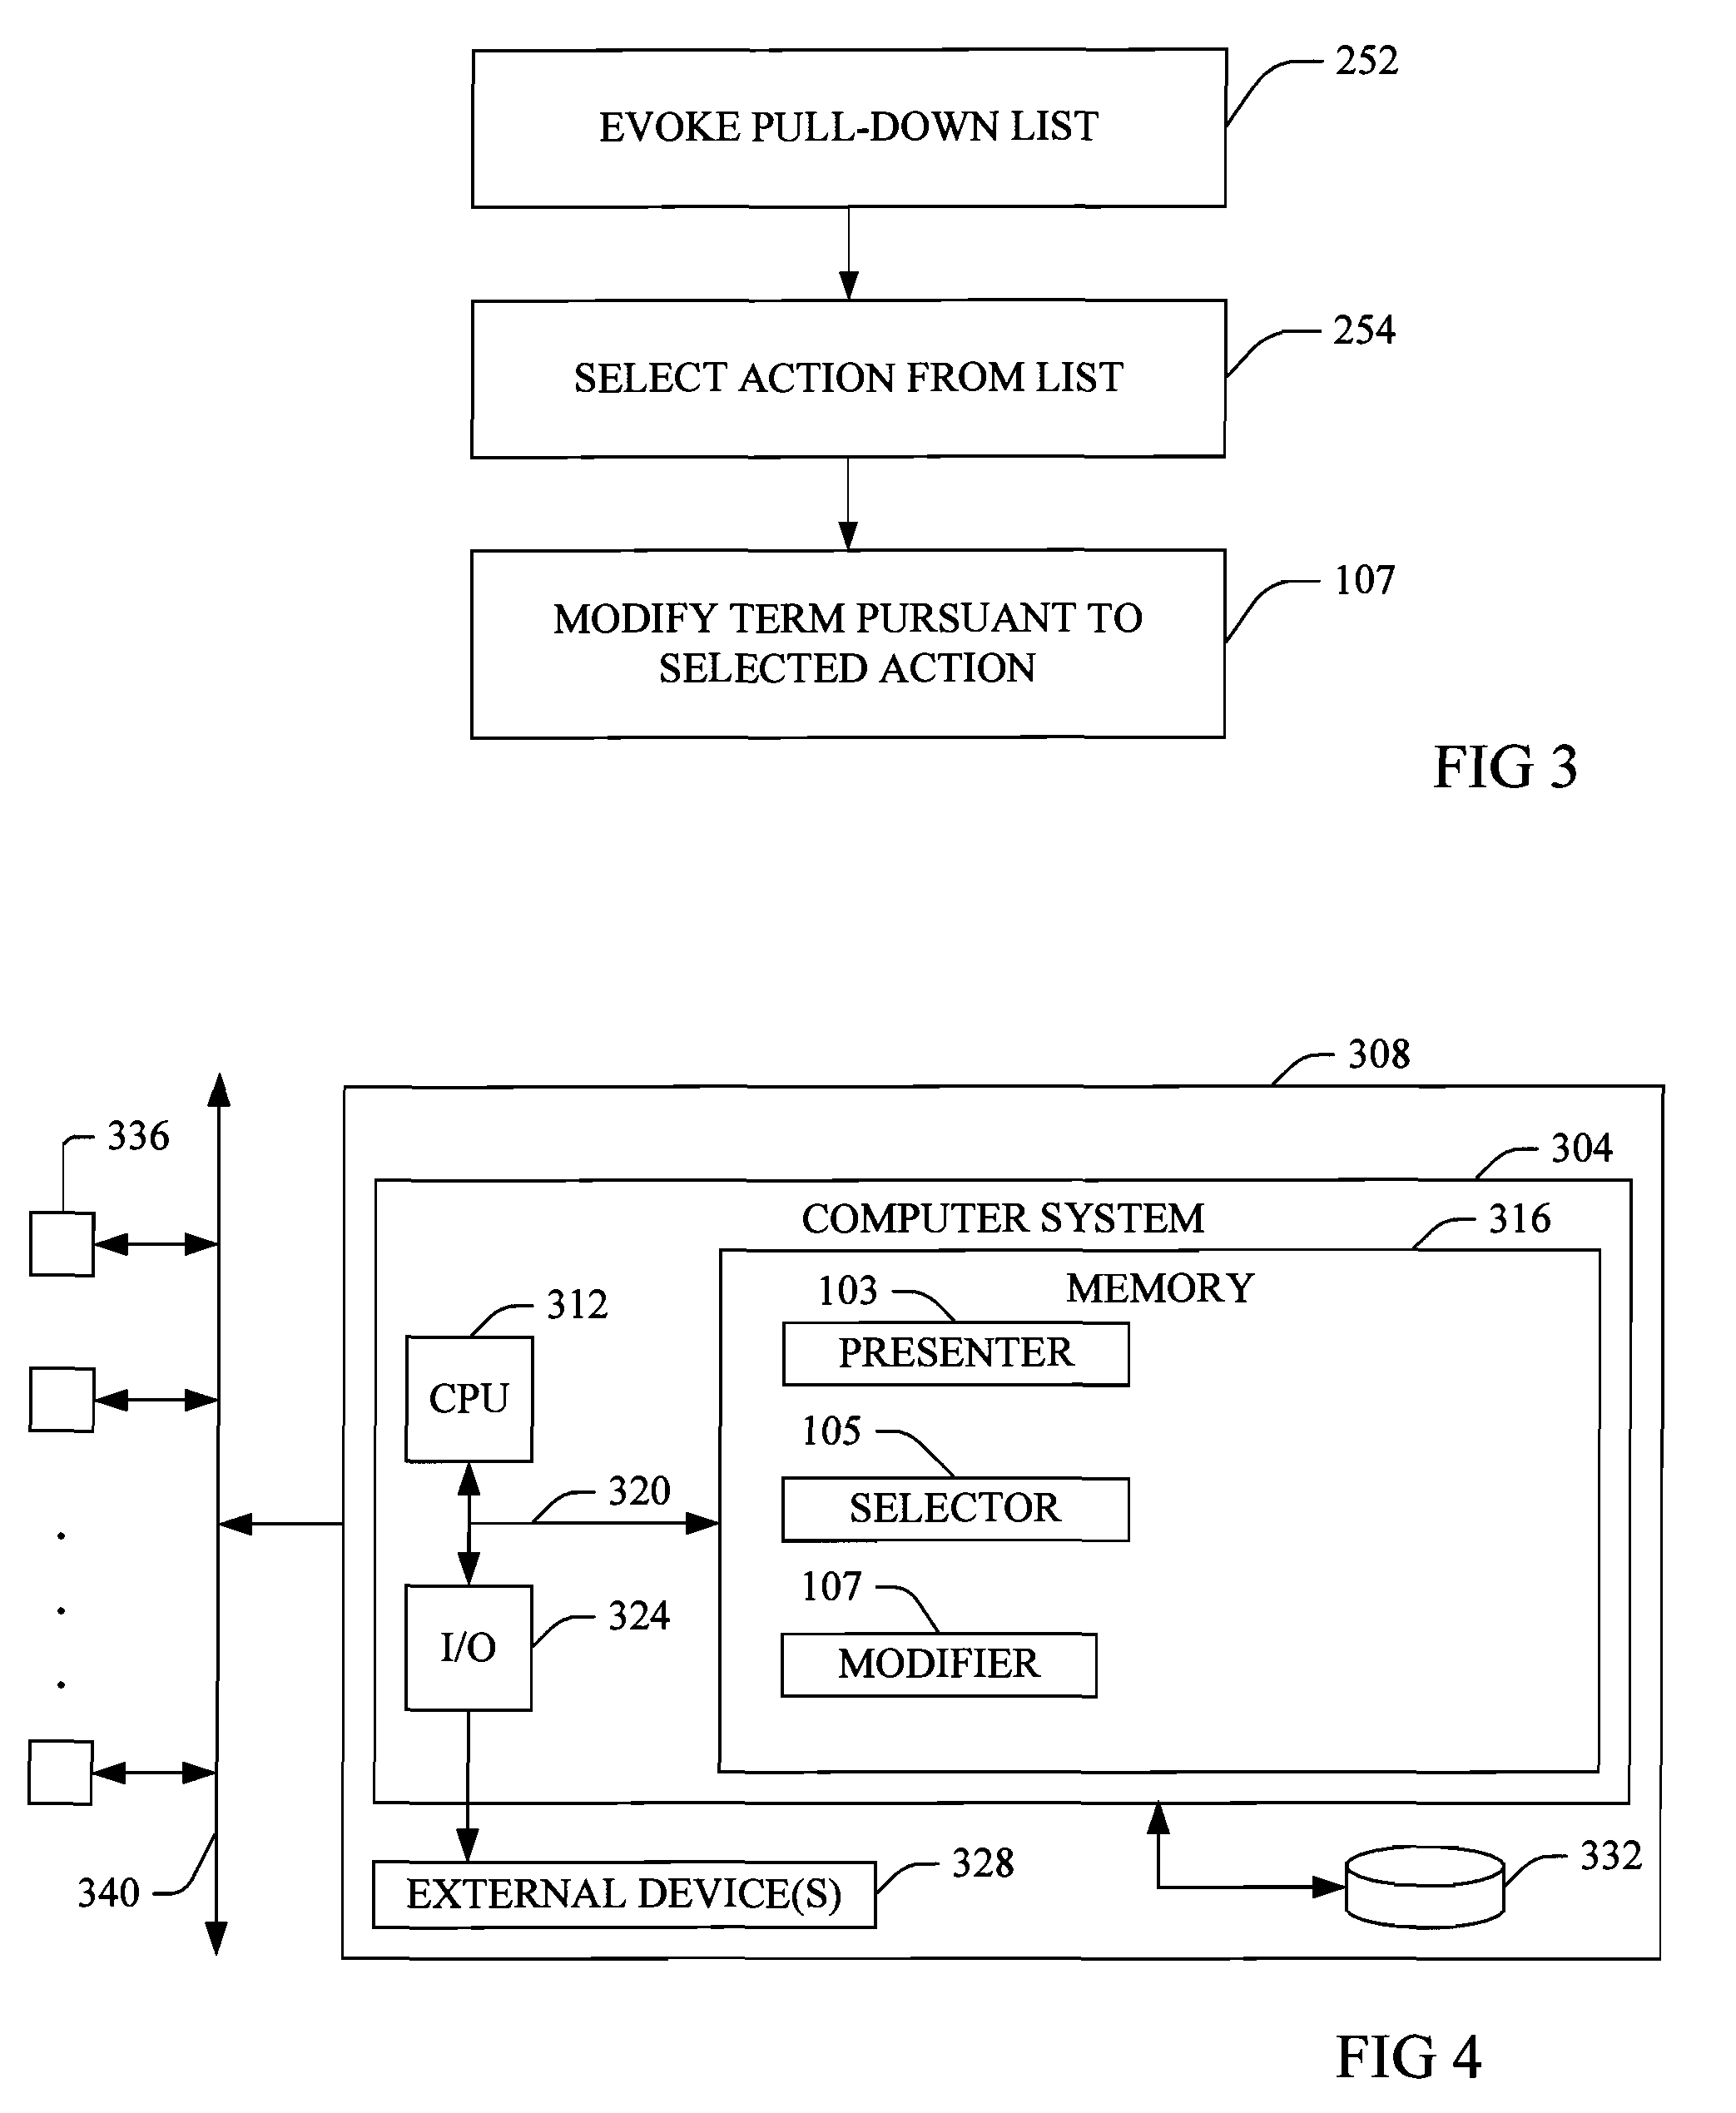 Method, system, and program product for enhanced search query modification